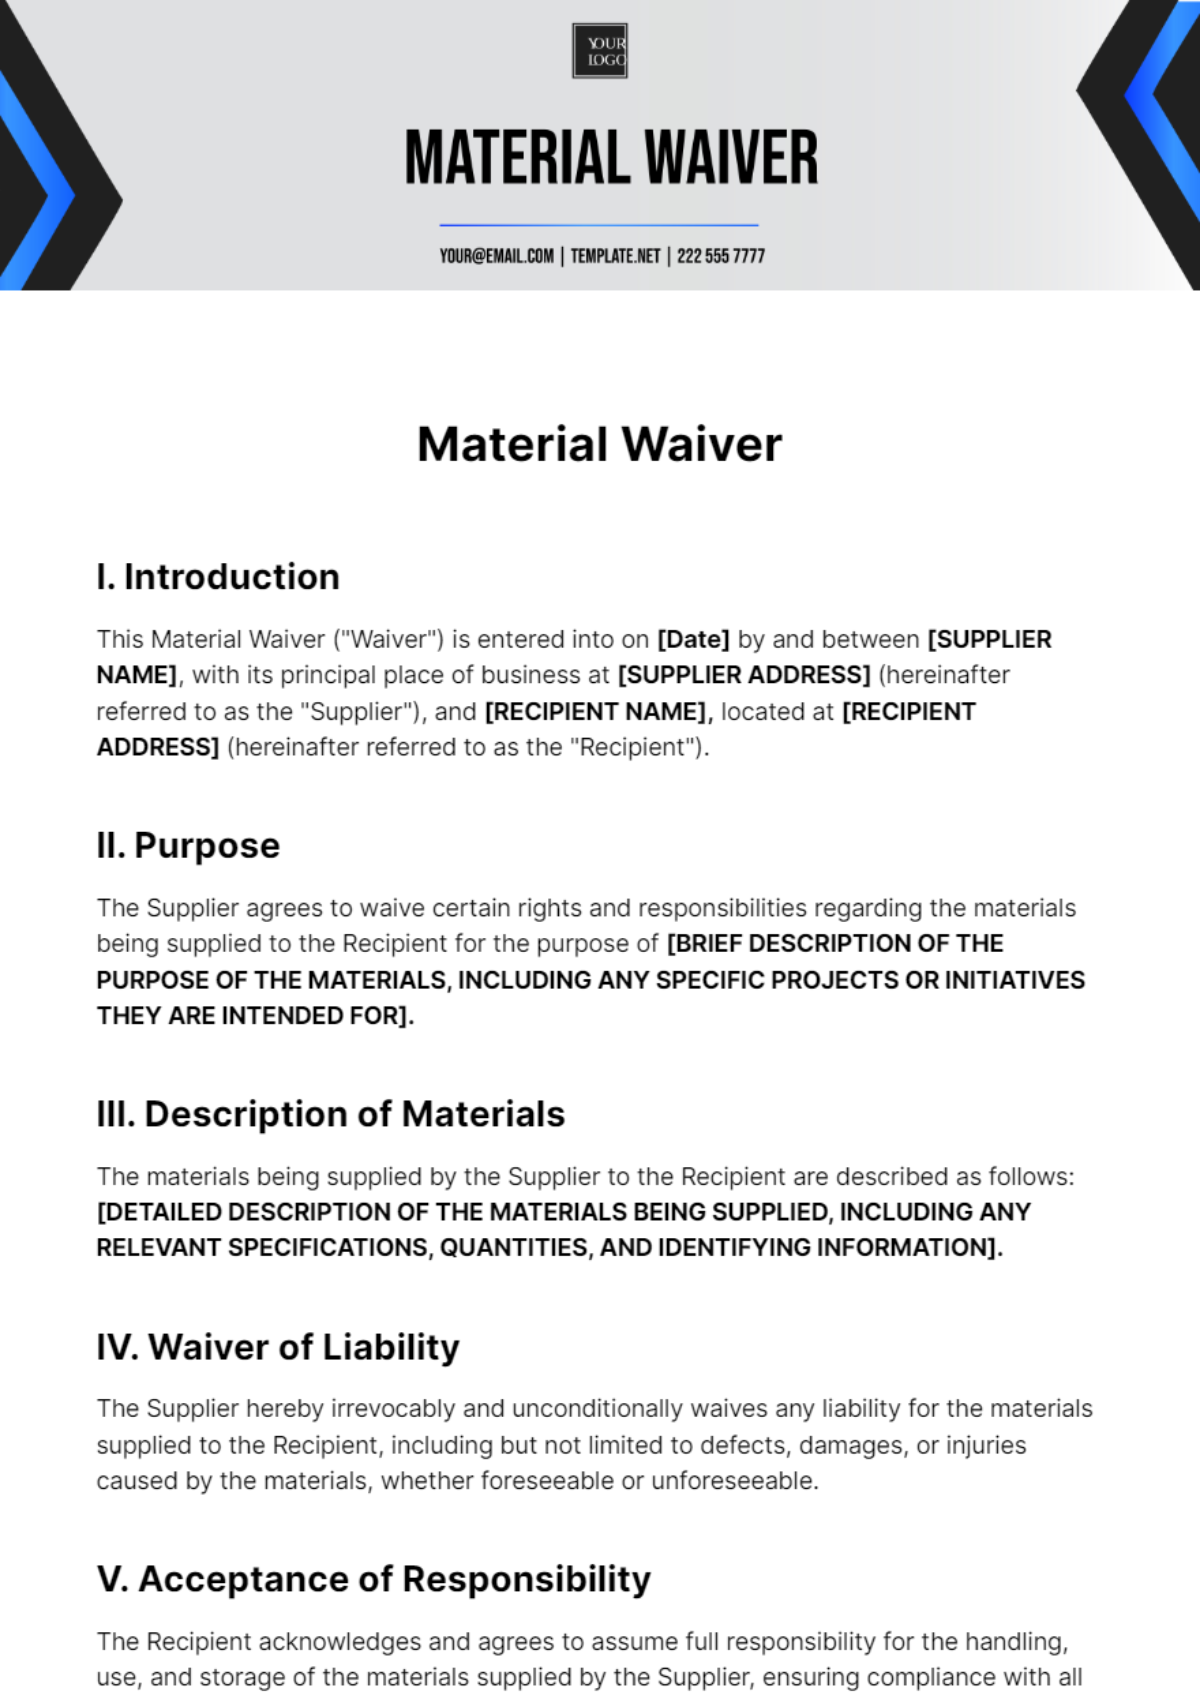 Material Waiver Template